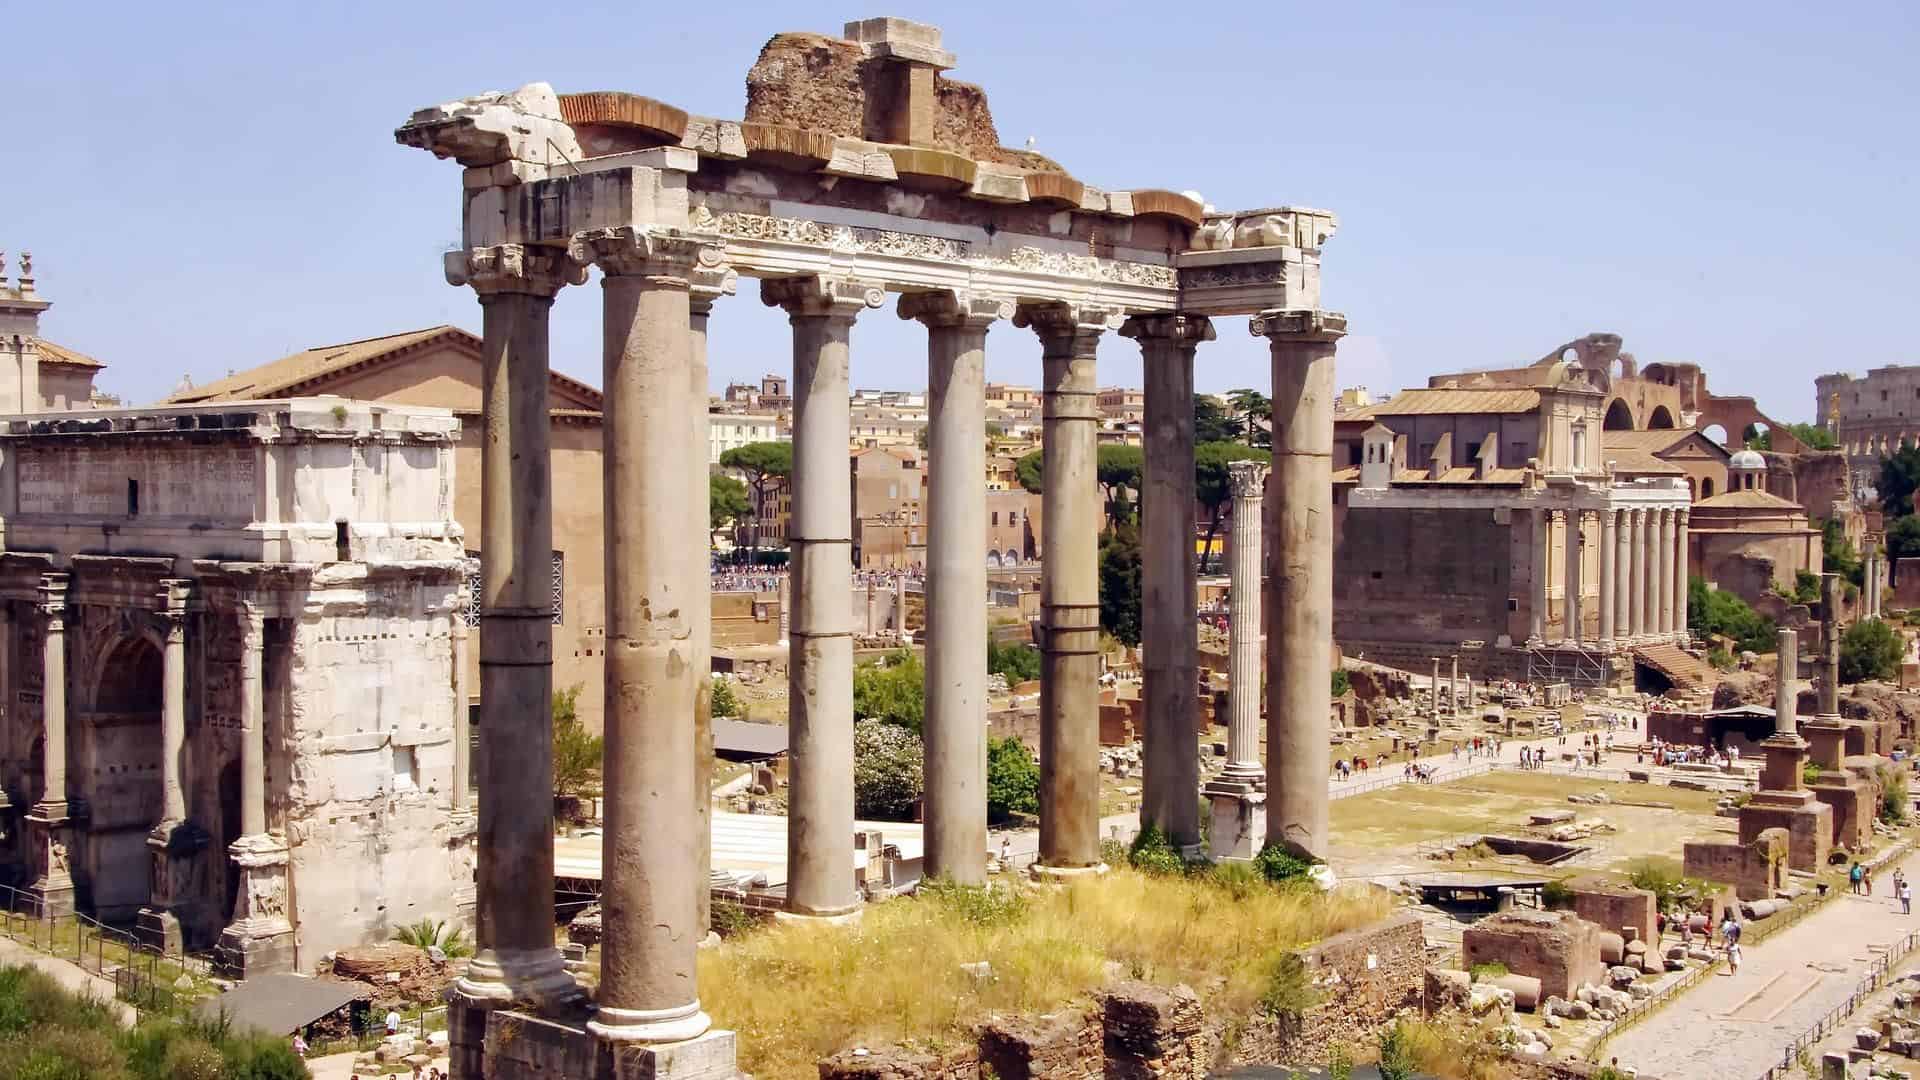 The Temple of Saturn at the Roman Forum